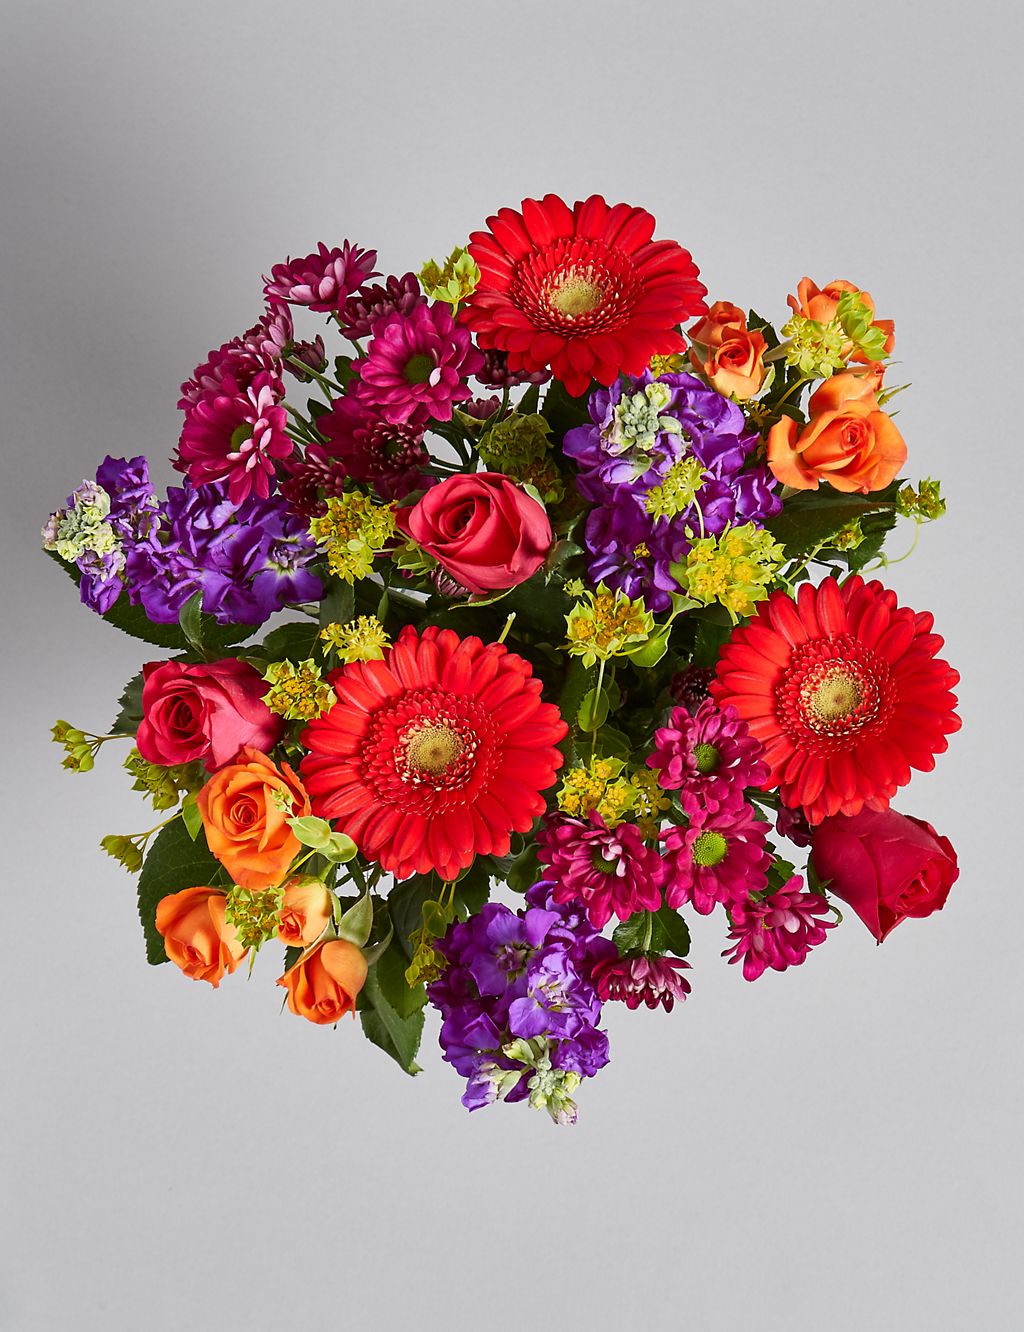 Summer Stocks & Rose Bouquet with Vase 4 of 5